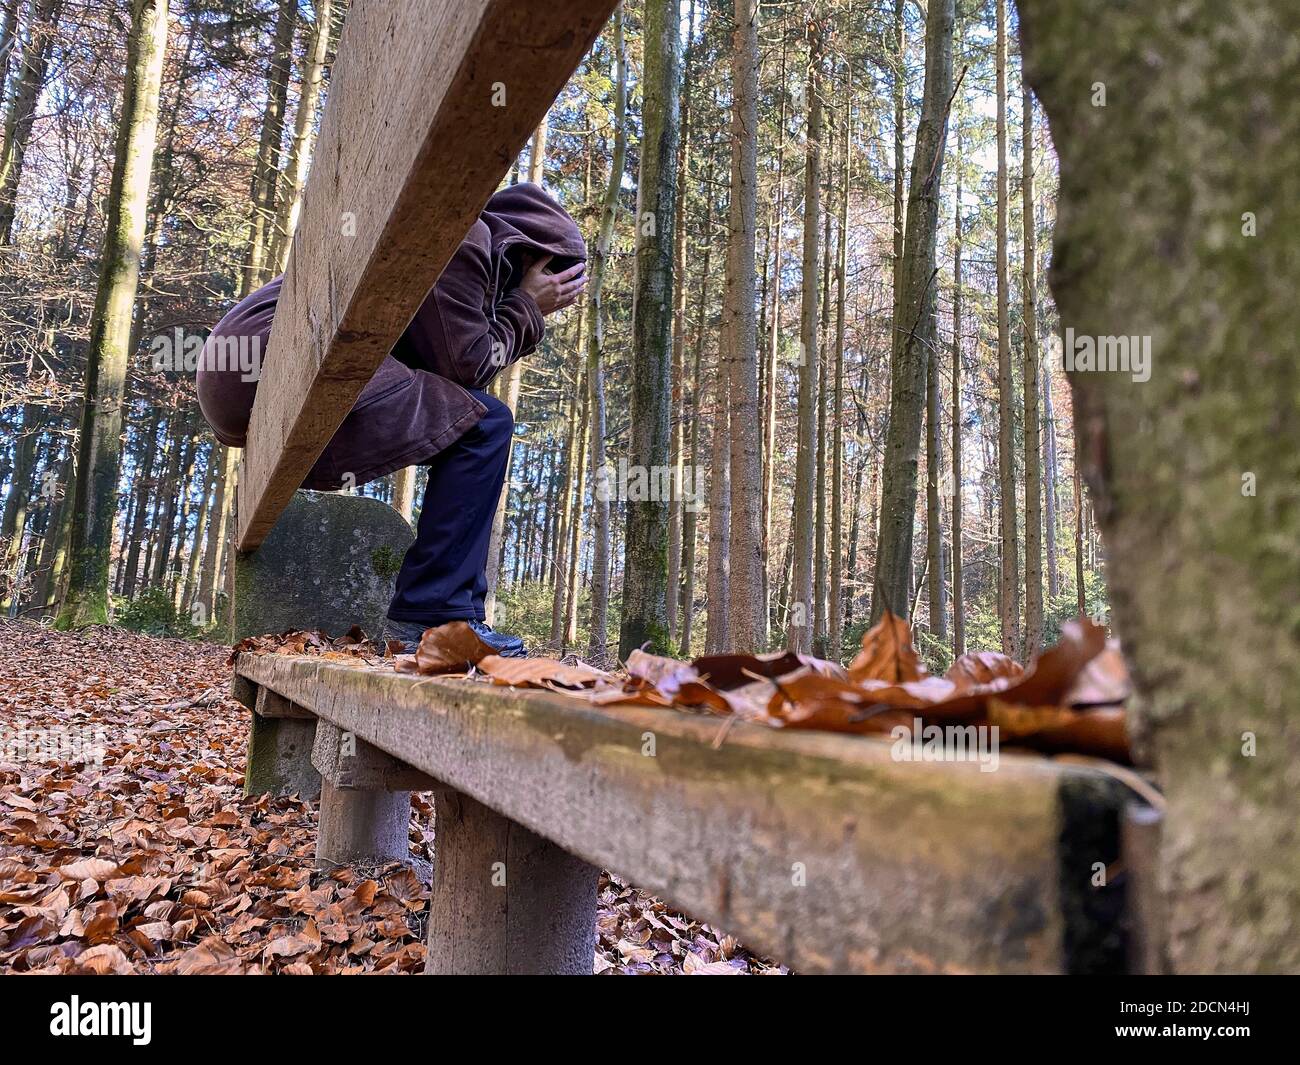 A woman is walking through the forest in autumn, forest bathing, or shinrin-yoku  on November 22, 2020 in Pfaffenhofen a.d.Ilm, Bavaria, Germany. Forest bath – has the power to counter illnesses including cancer, strokes, gastric ulcers, depression. The term emerged in Japan in the 1980s as a physiological and psychological exercise called shinrin-yoku (“forest bathing” or “taking in the forest). © Peter Schatz / Alamy Stock Photos  MODEL RELEASED Stock Photo